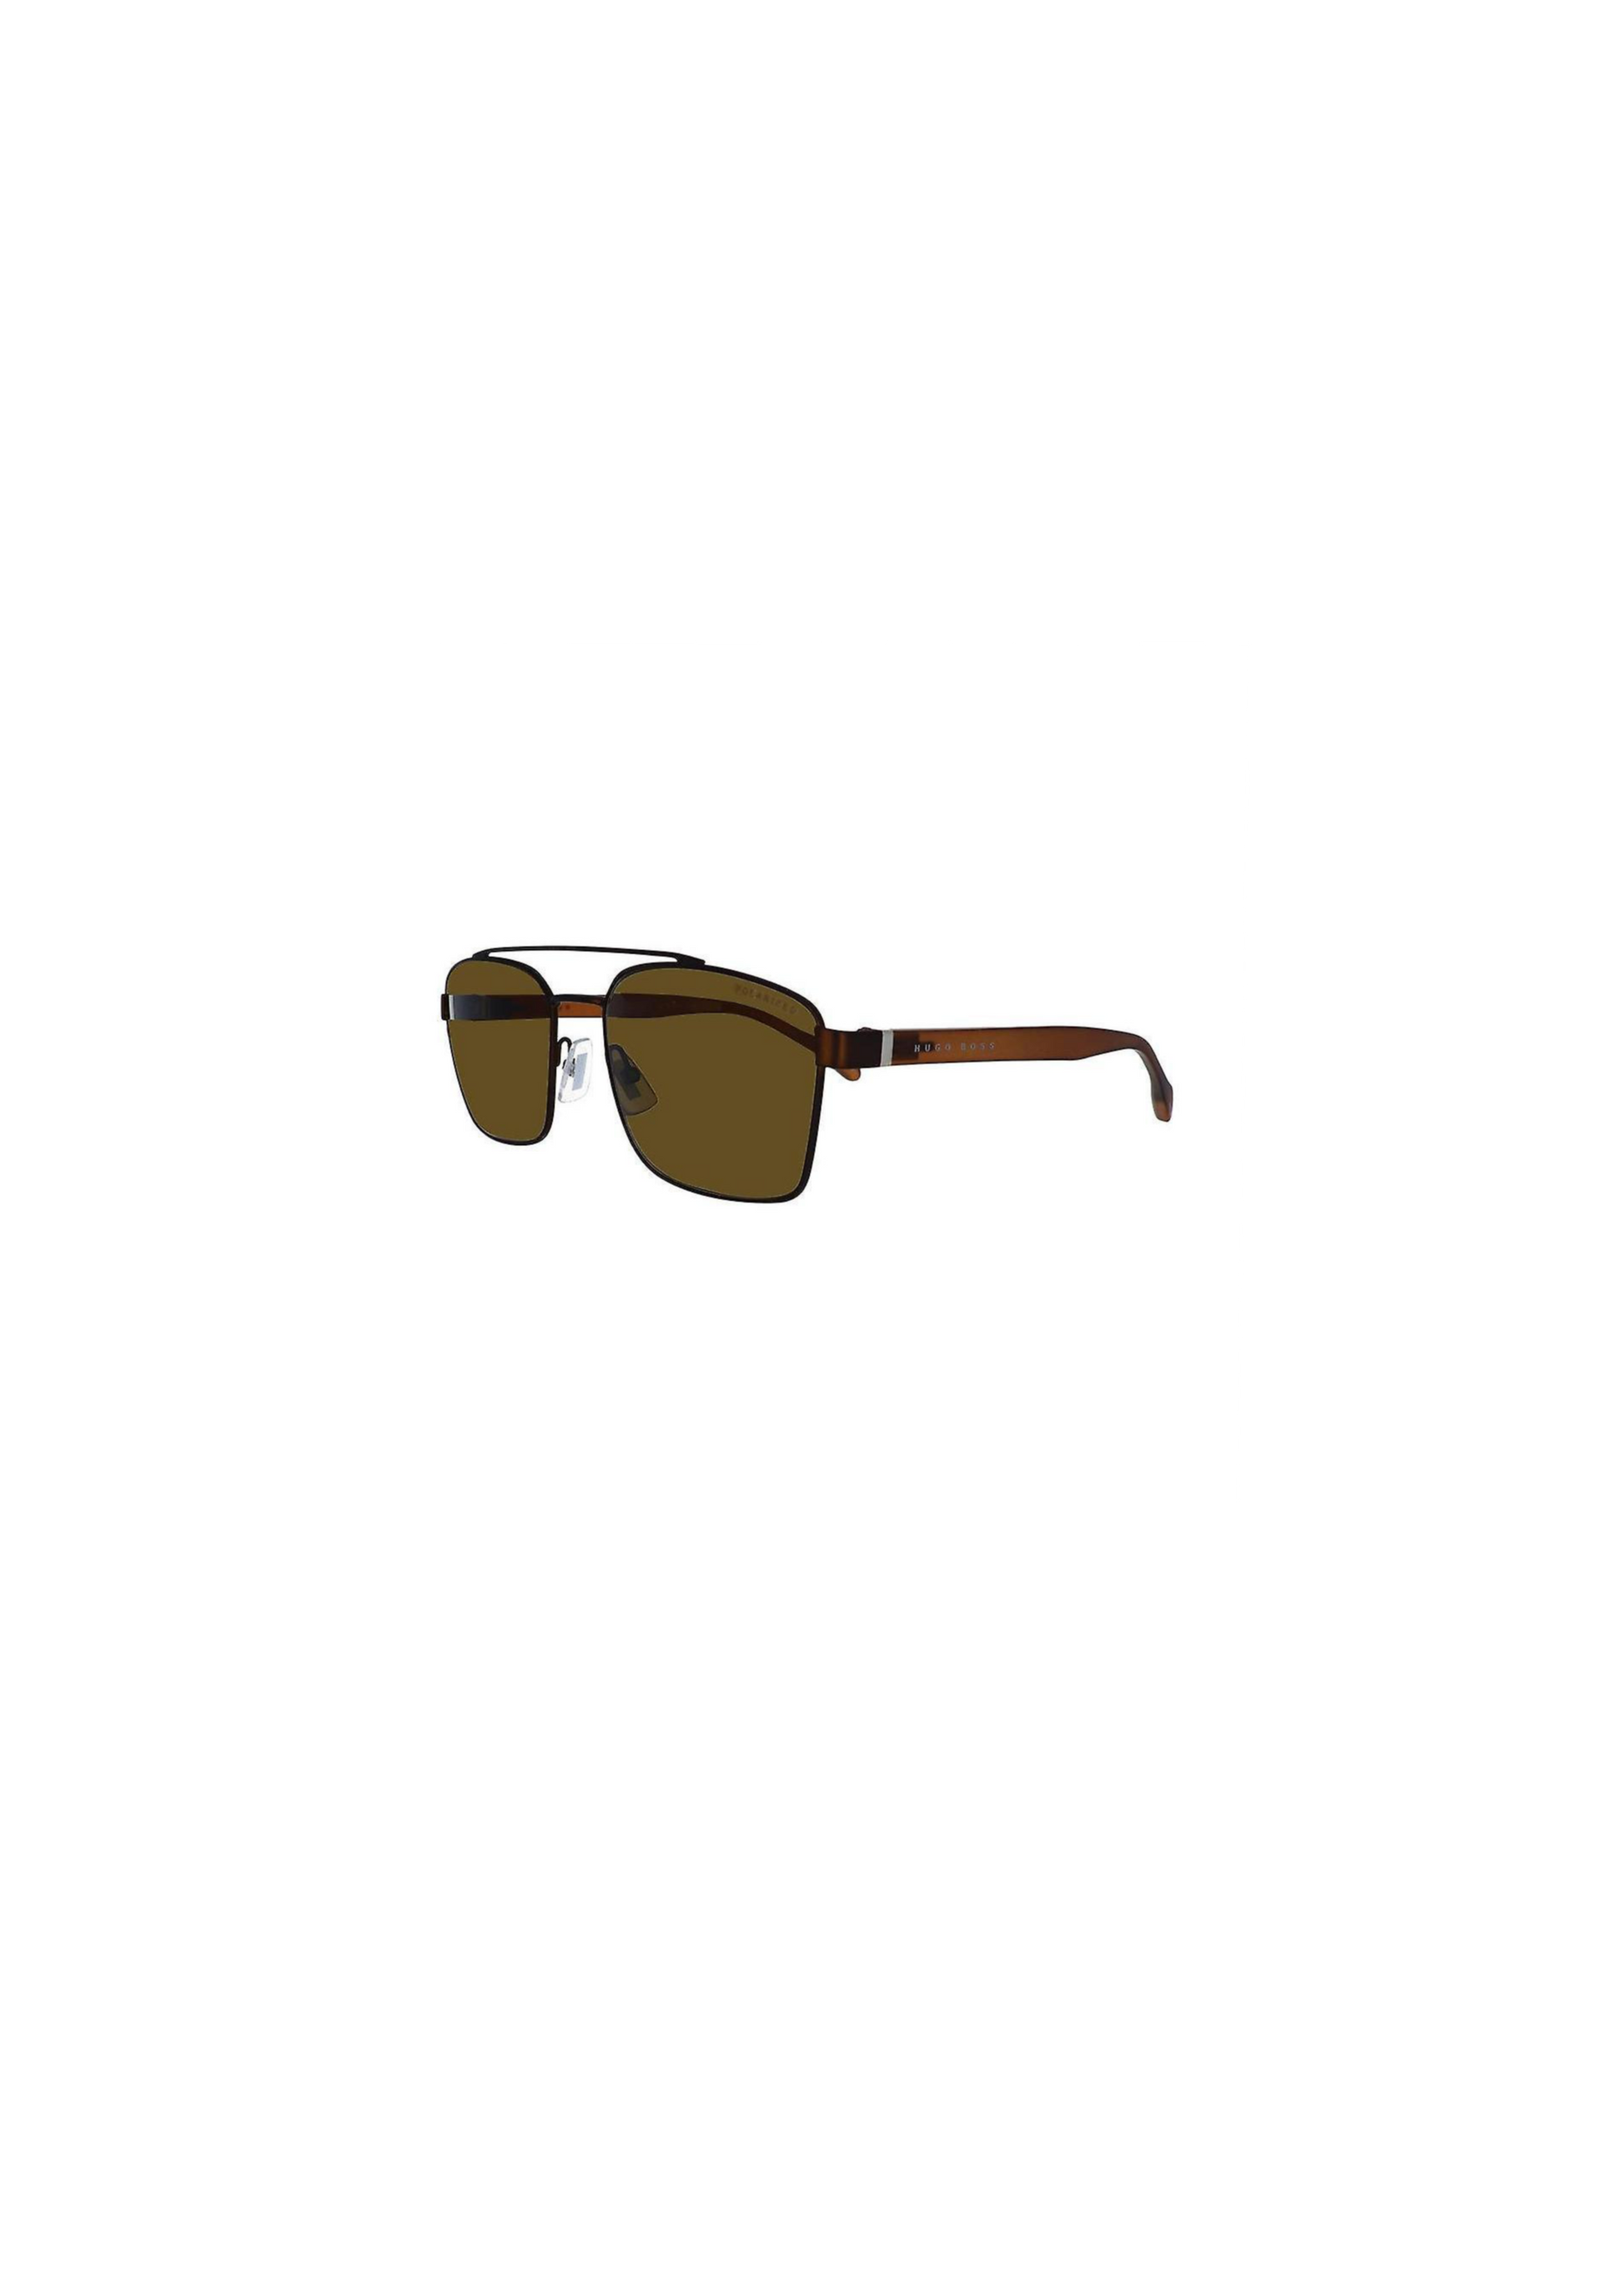 HUGO BOSS  BOSS1117 YZ4 57     PRODUCT DETAILS  Color:	Matte Brown Lens colour:	Brown Shape:	Square Goggle type:	 Product Name:	Hugo Boss BOSS 1117 YZ4 57 Size:	57 mm Bright:	19 mm Arms:	140 mm Material:	Metal Lenses:	Tinted